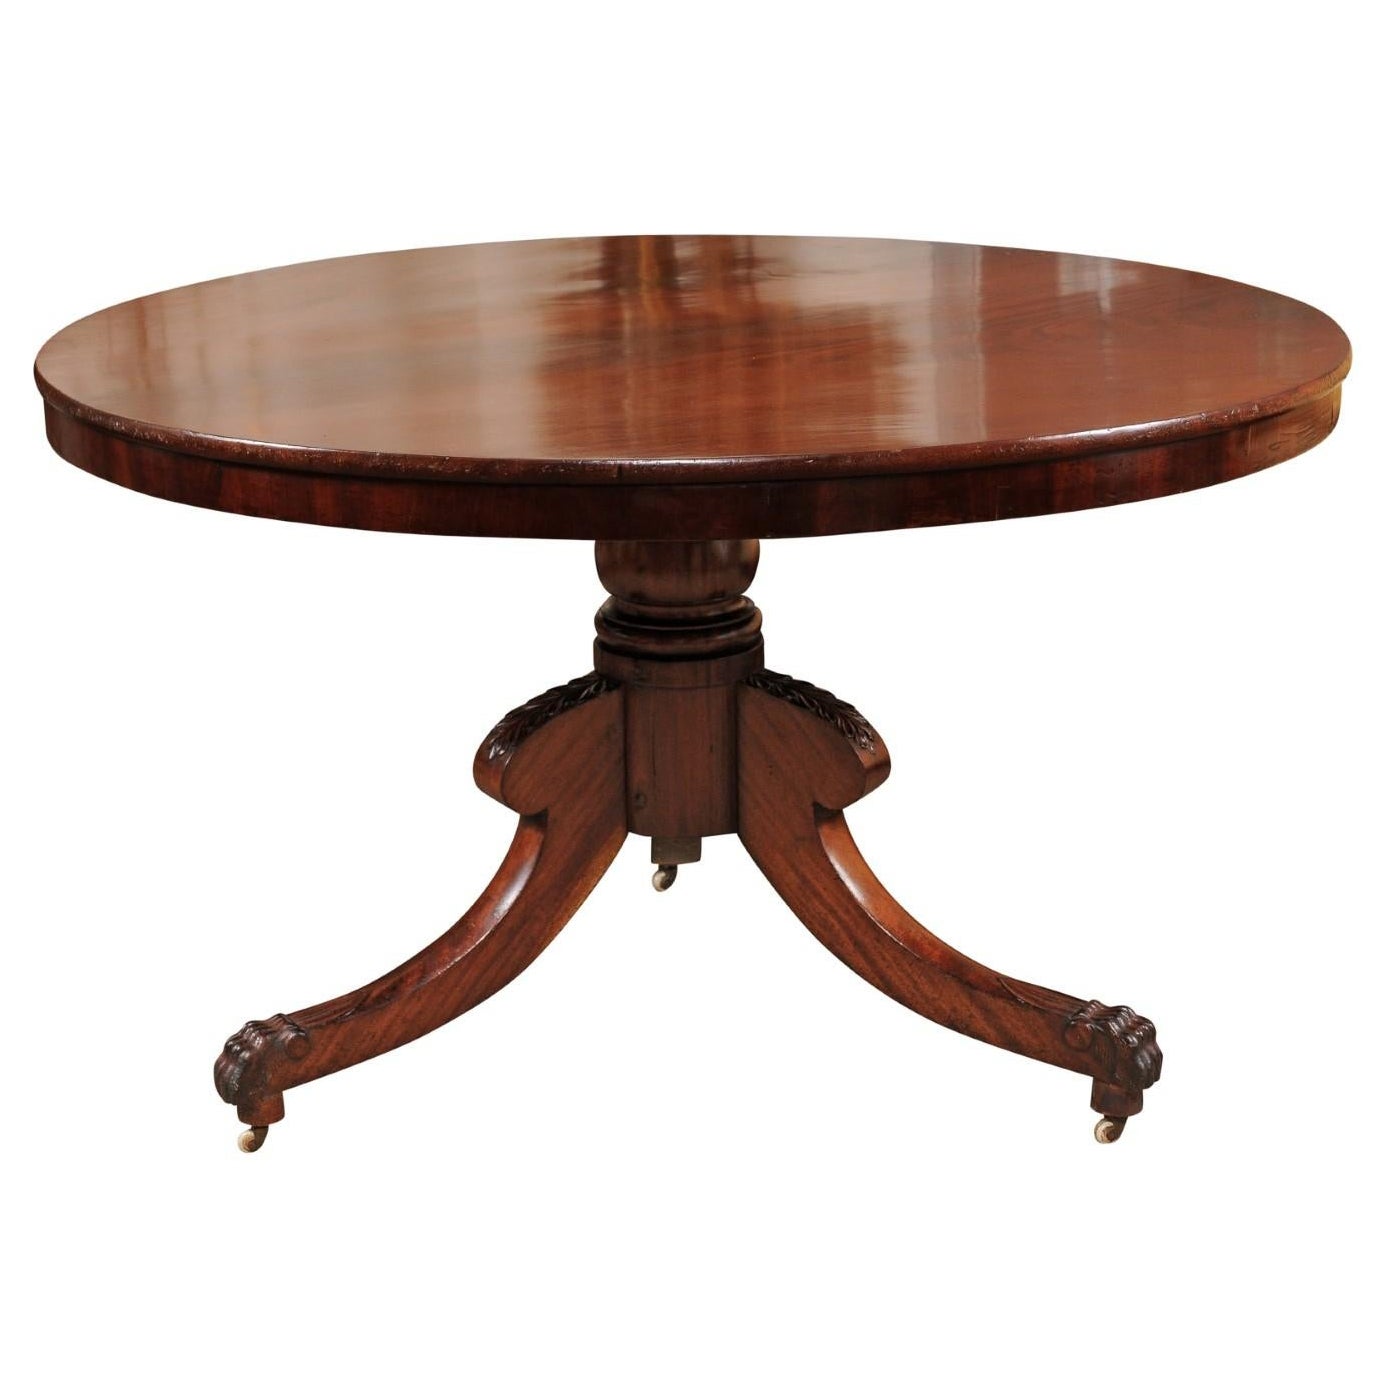 19th Century English Mahogany Center Table with Pedestal Base & 3 Splayed Legs  For Sale